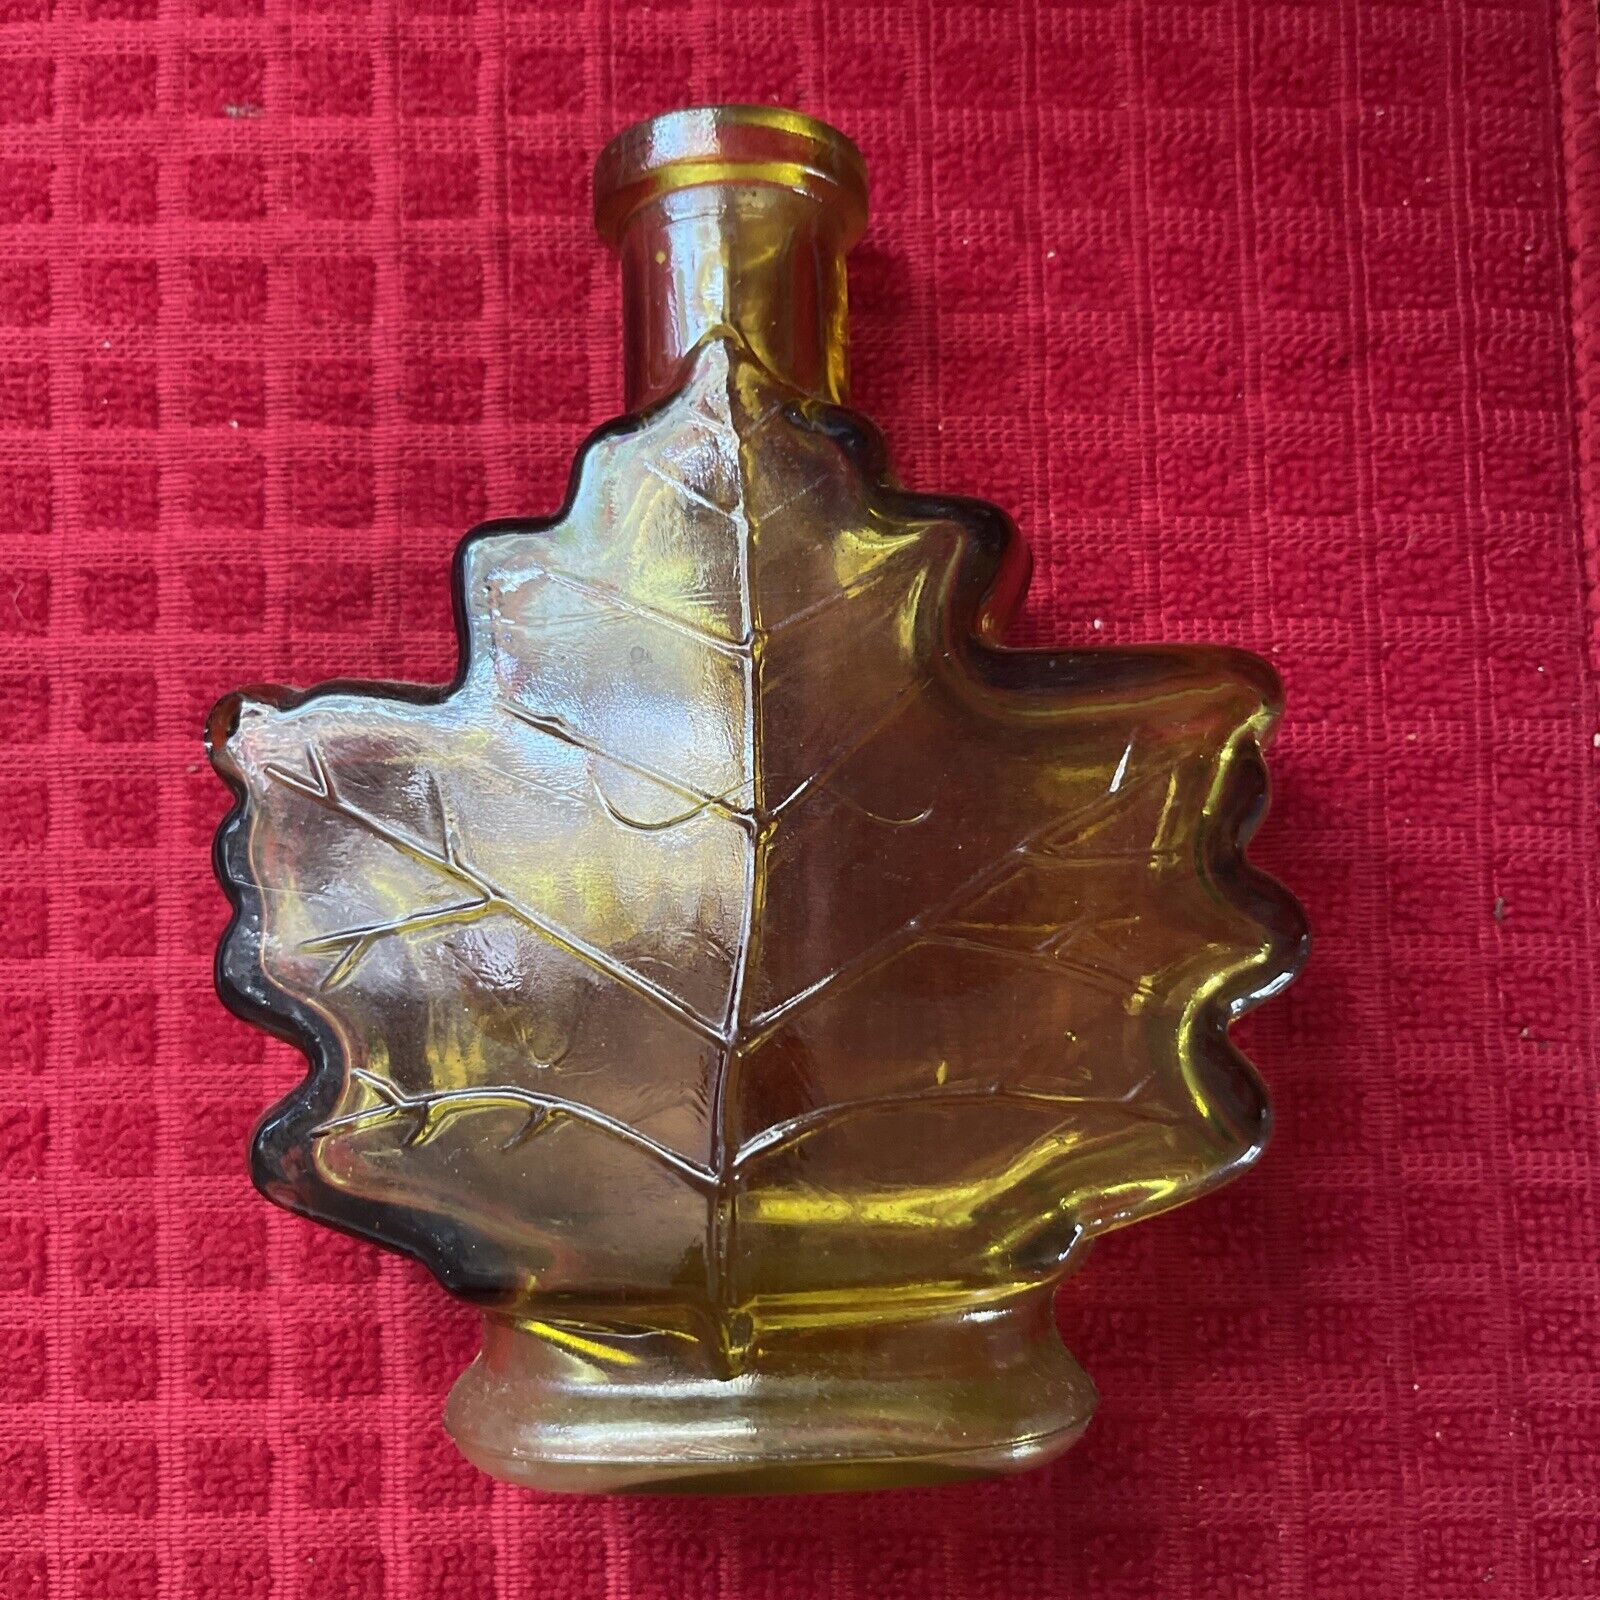 Pier One Gold Maple Leaf 6” Tall Glass Vase. RETIRED